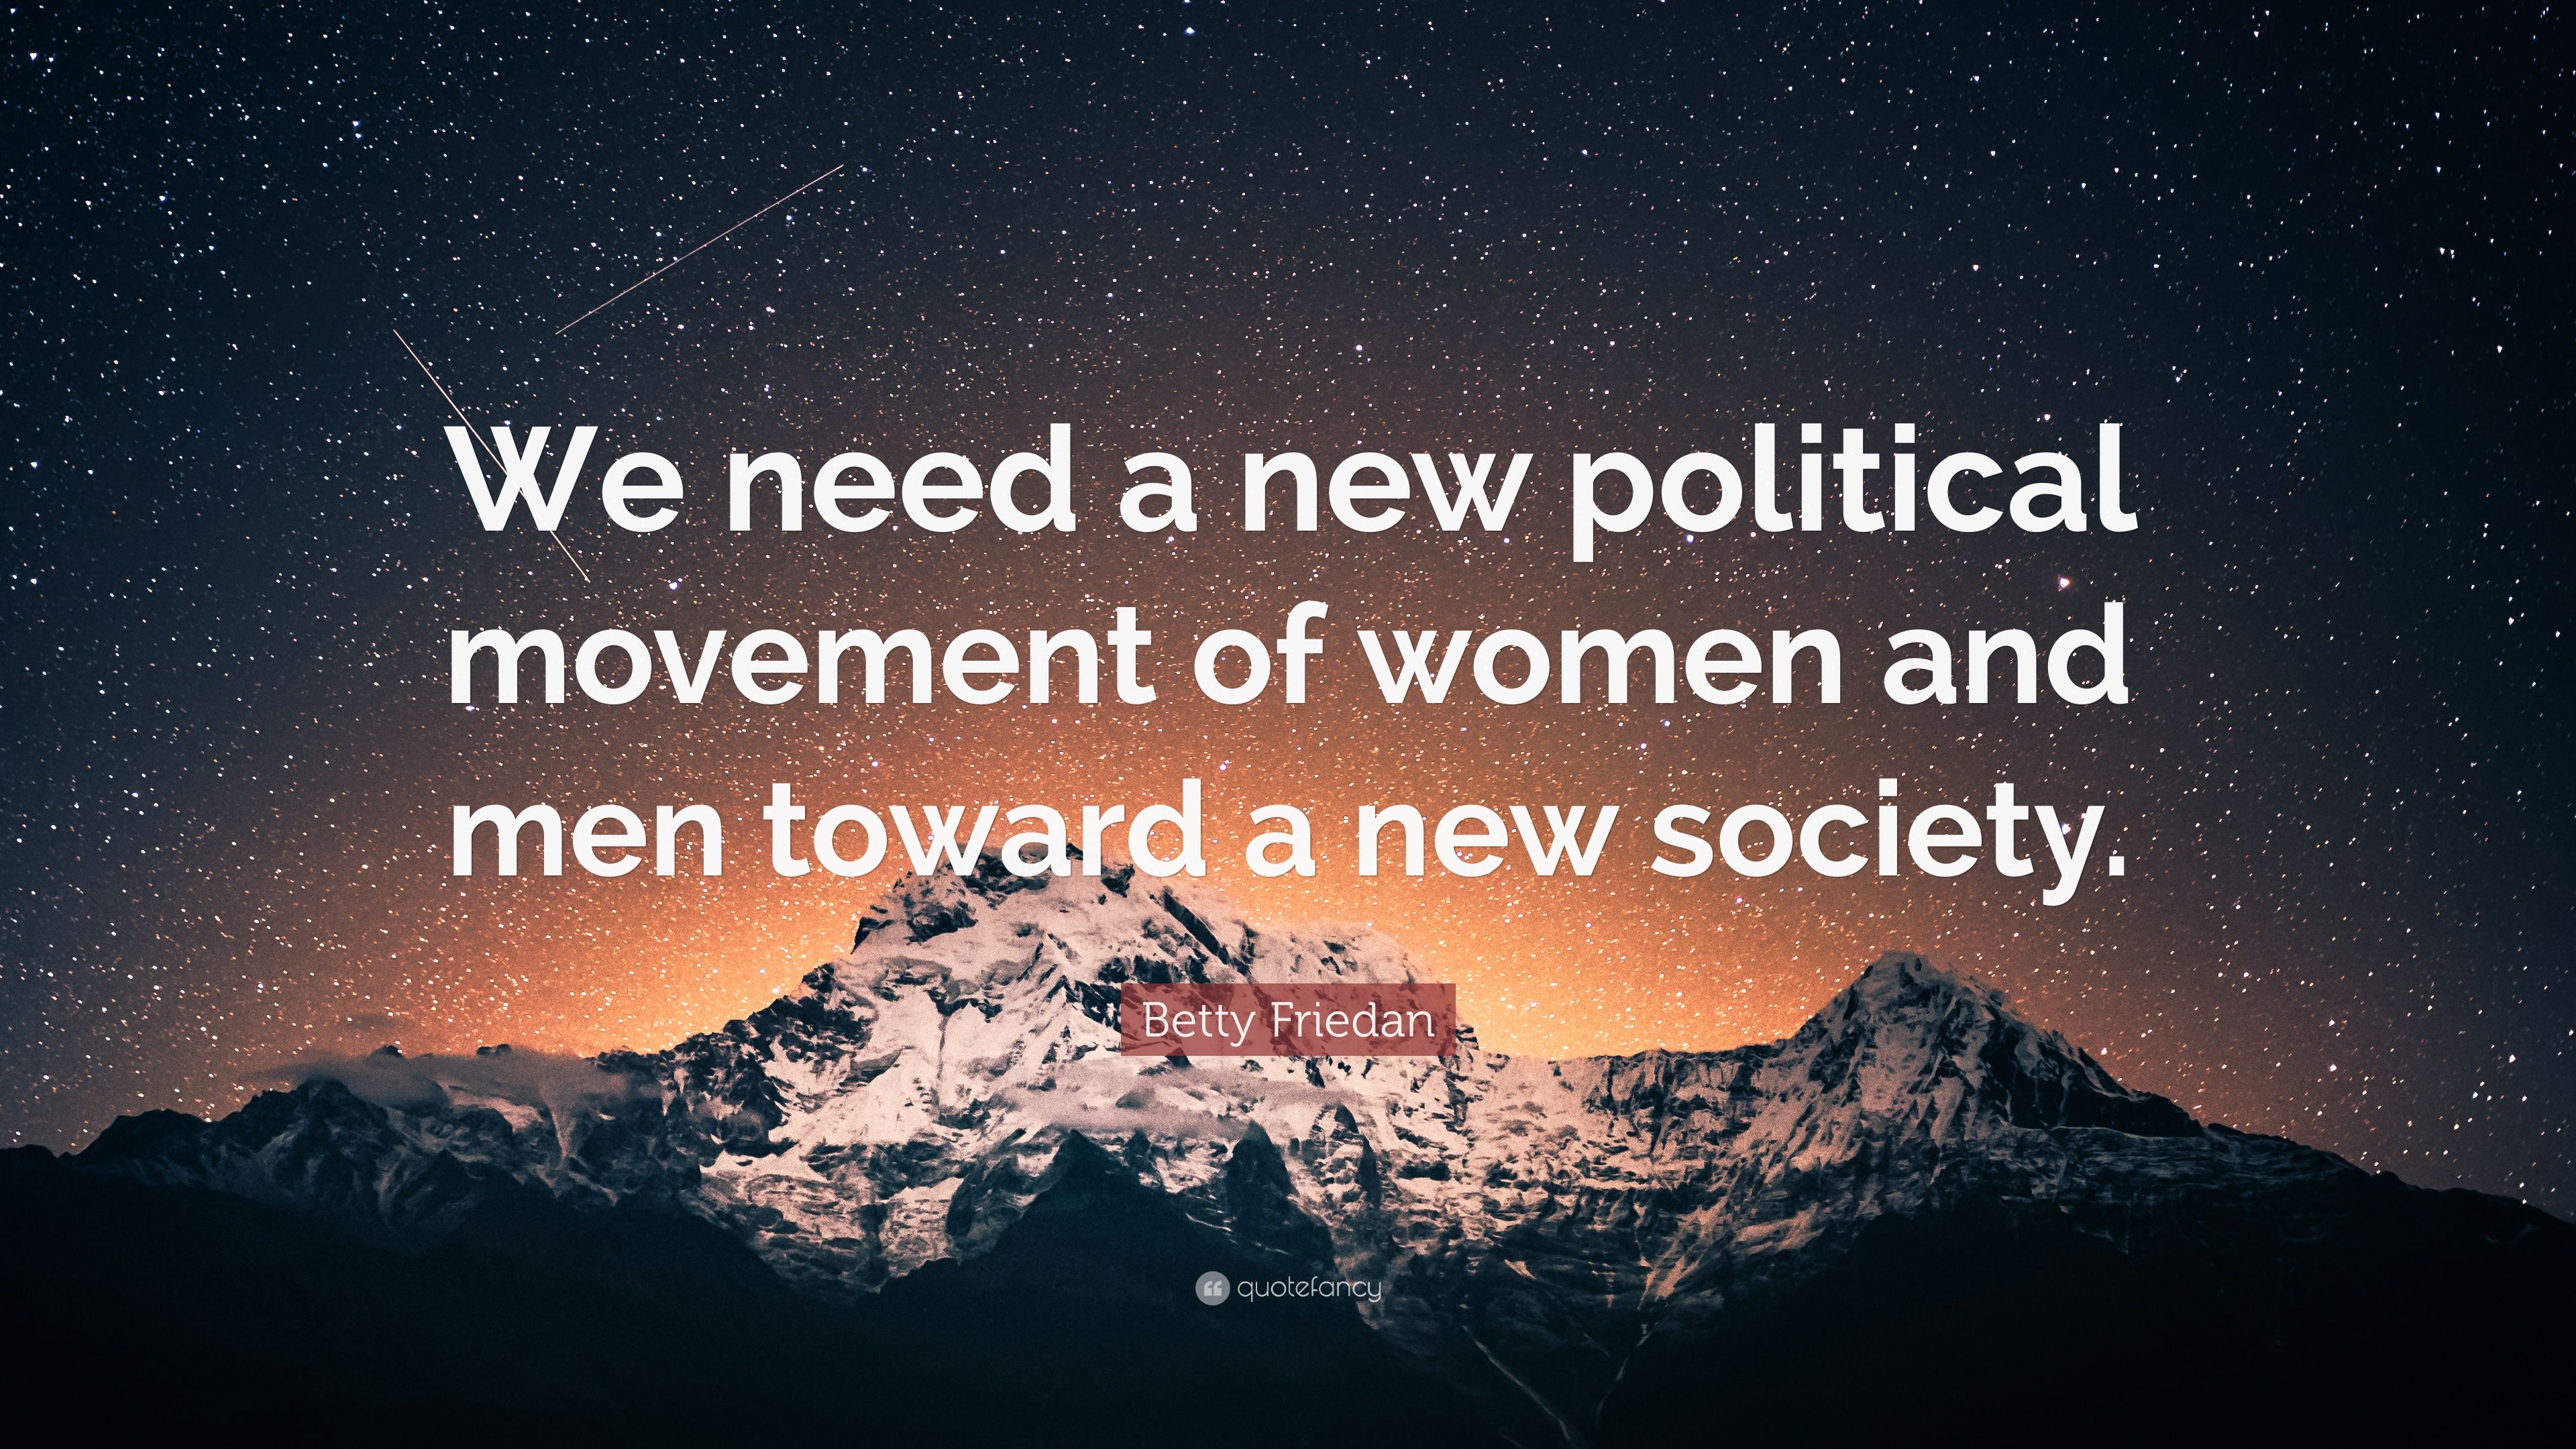 Betty friedan quote âwe need a new political movement of women and men toward a new